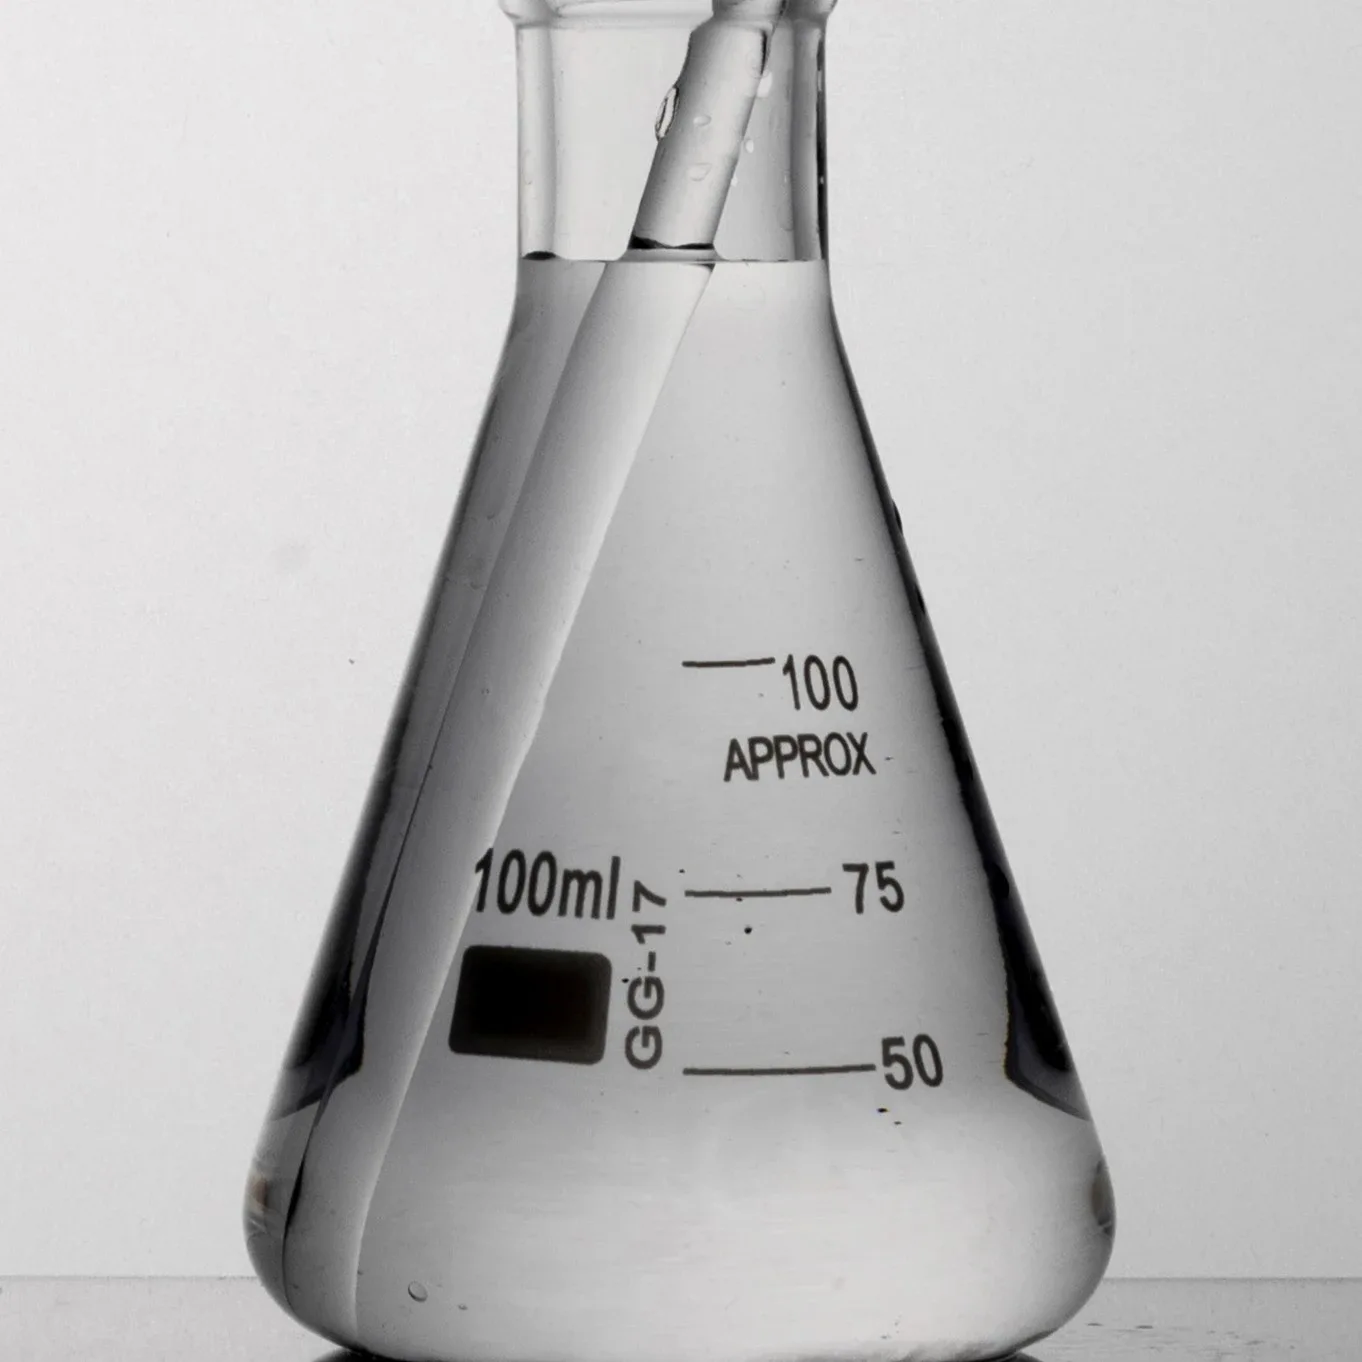 Refined Glycerine 99.7% Min (Mixed Animal Fat) in Chemtradeasia